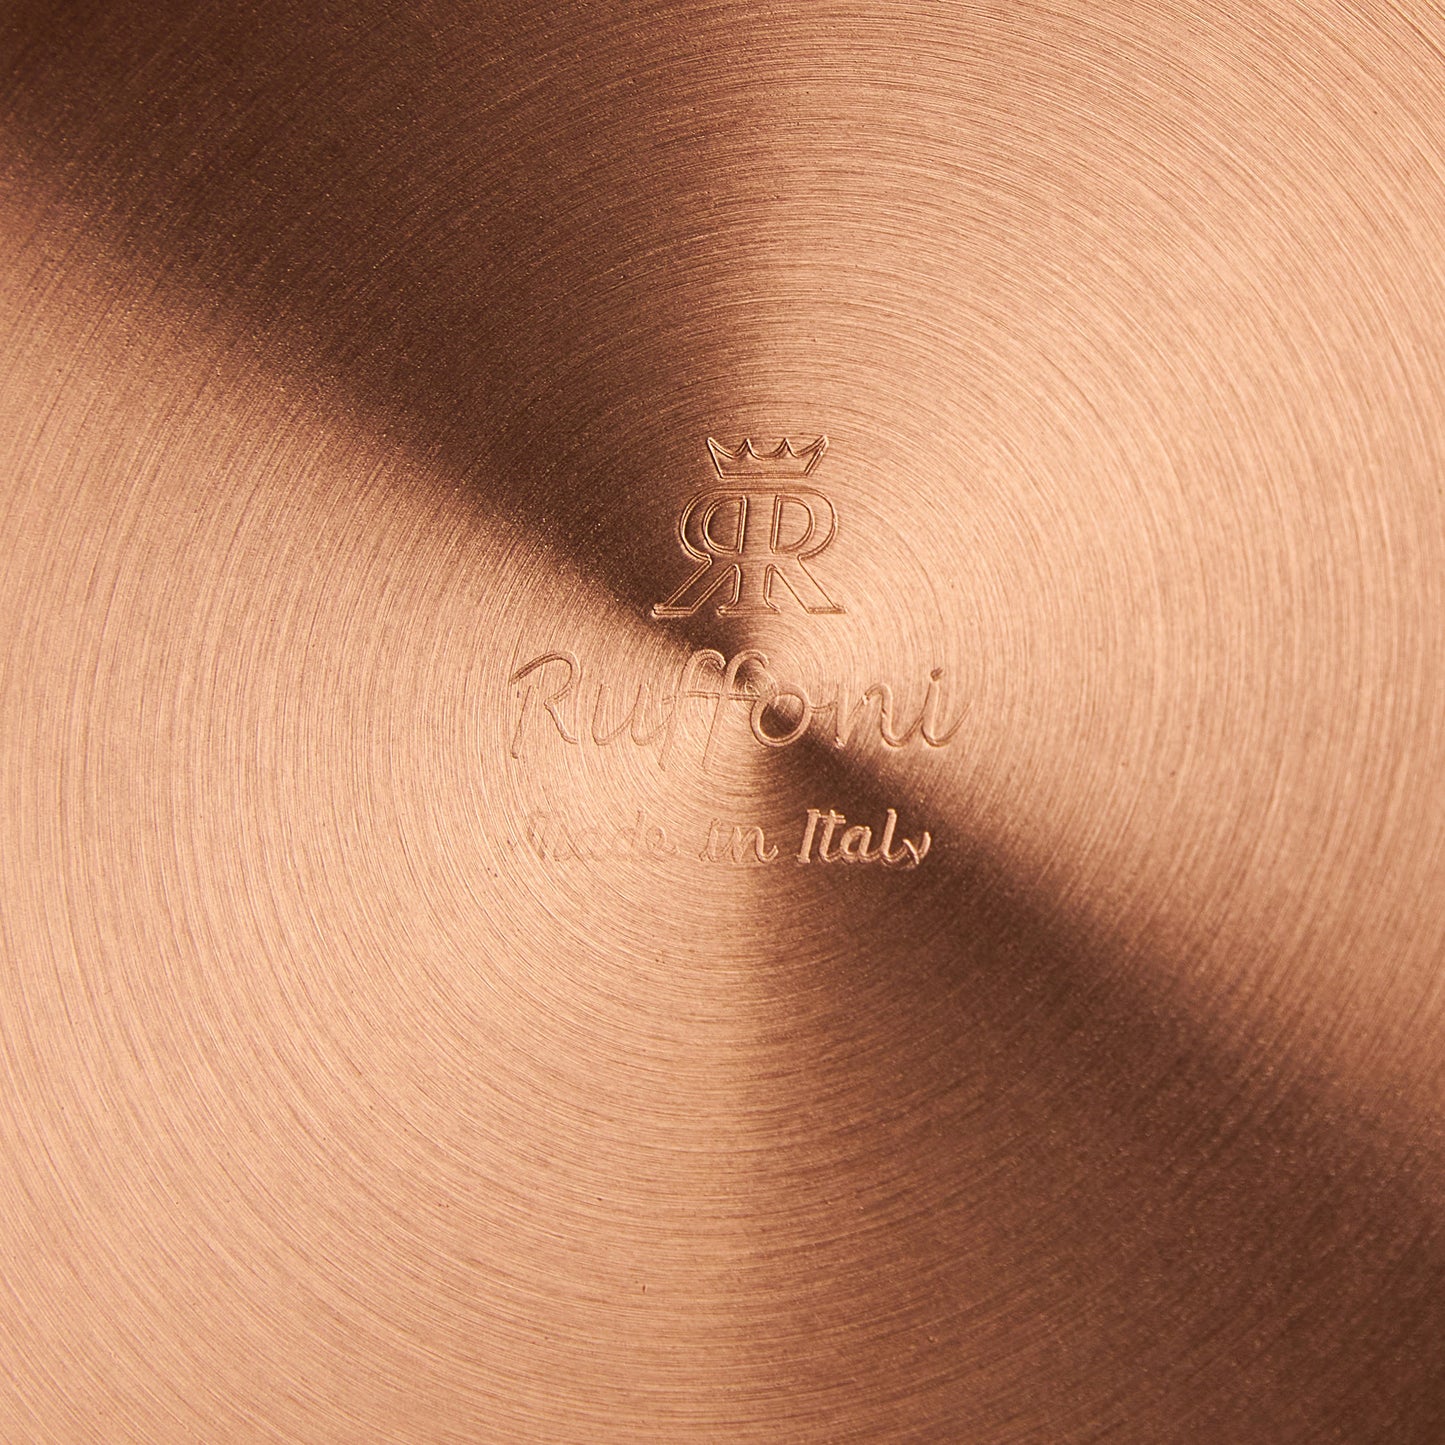 Ruffoni Made in Italy brand logo stamped under Historia hammered copper Bain-Marie for authenticity